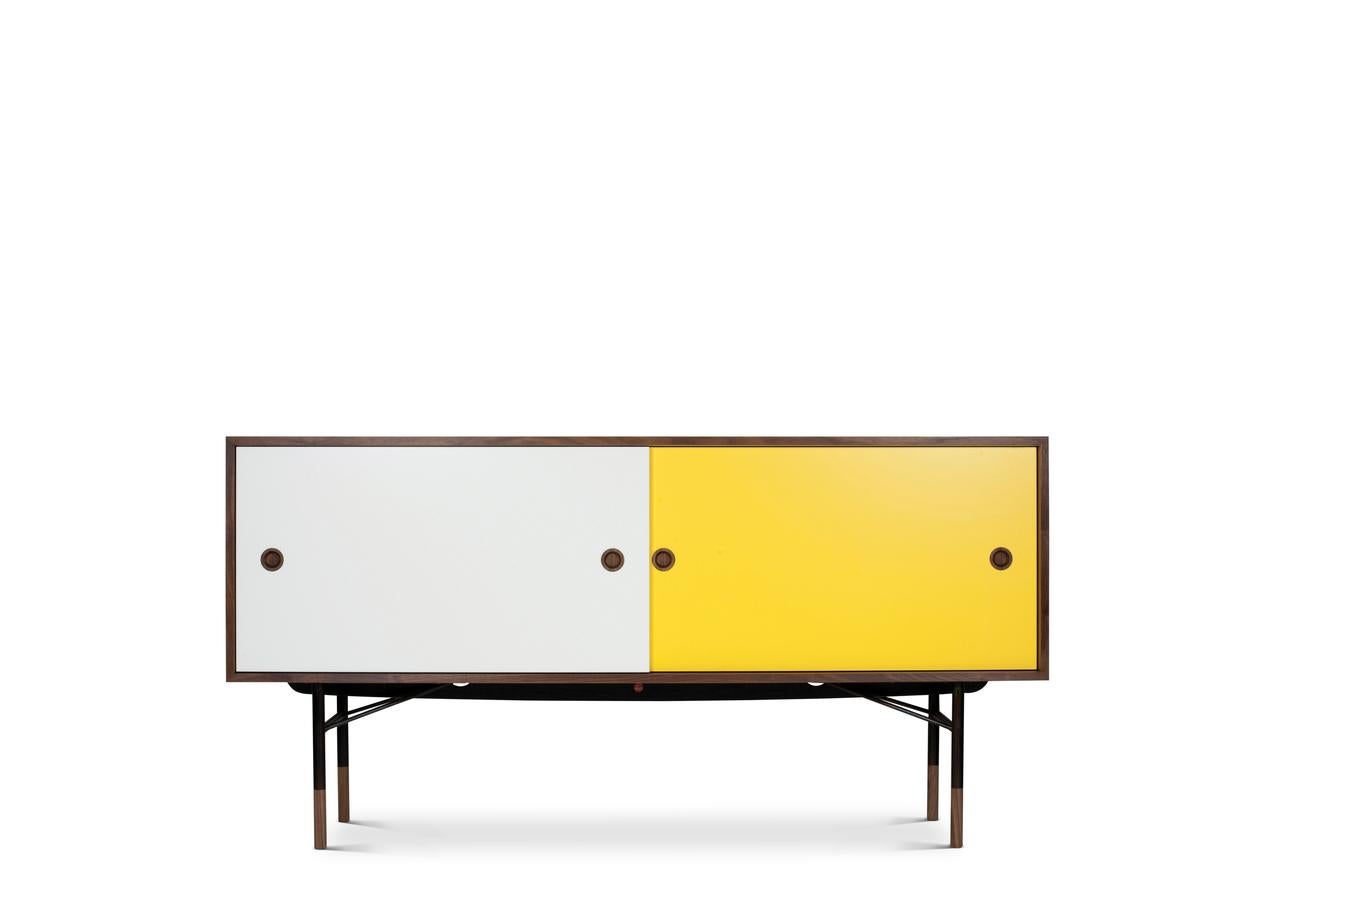 Sofa bench designed by Finn Juhl in 1955, relaunched in 2012.
Manufactured by House of Finn Juhl in Denmark.

After Finn Juhl’s rise to stardom in the American design circles around 1950, he became increasingly inspired by his American colleagues